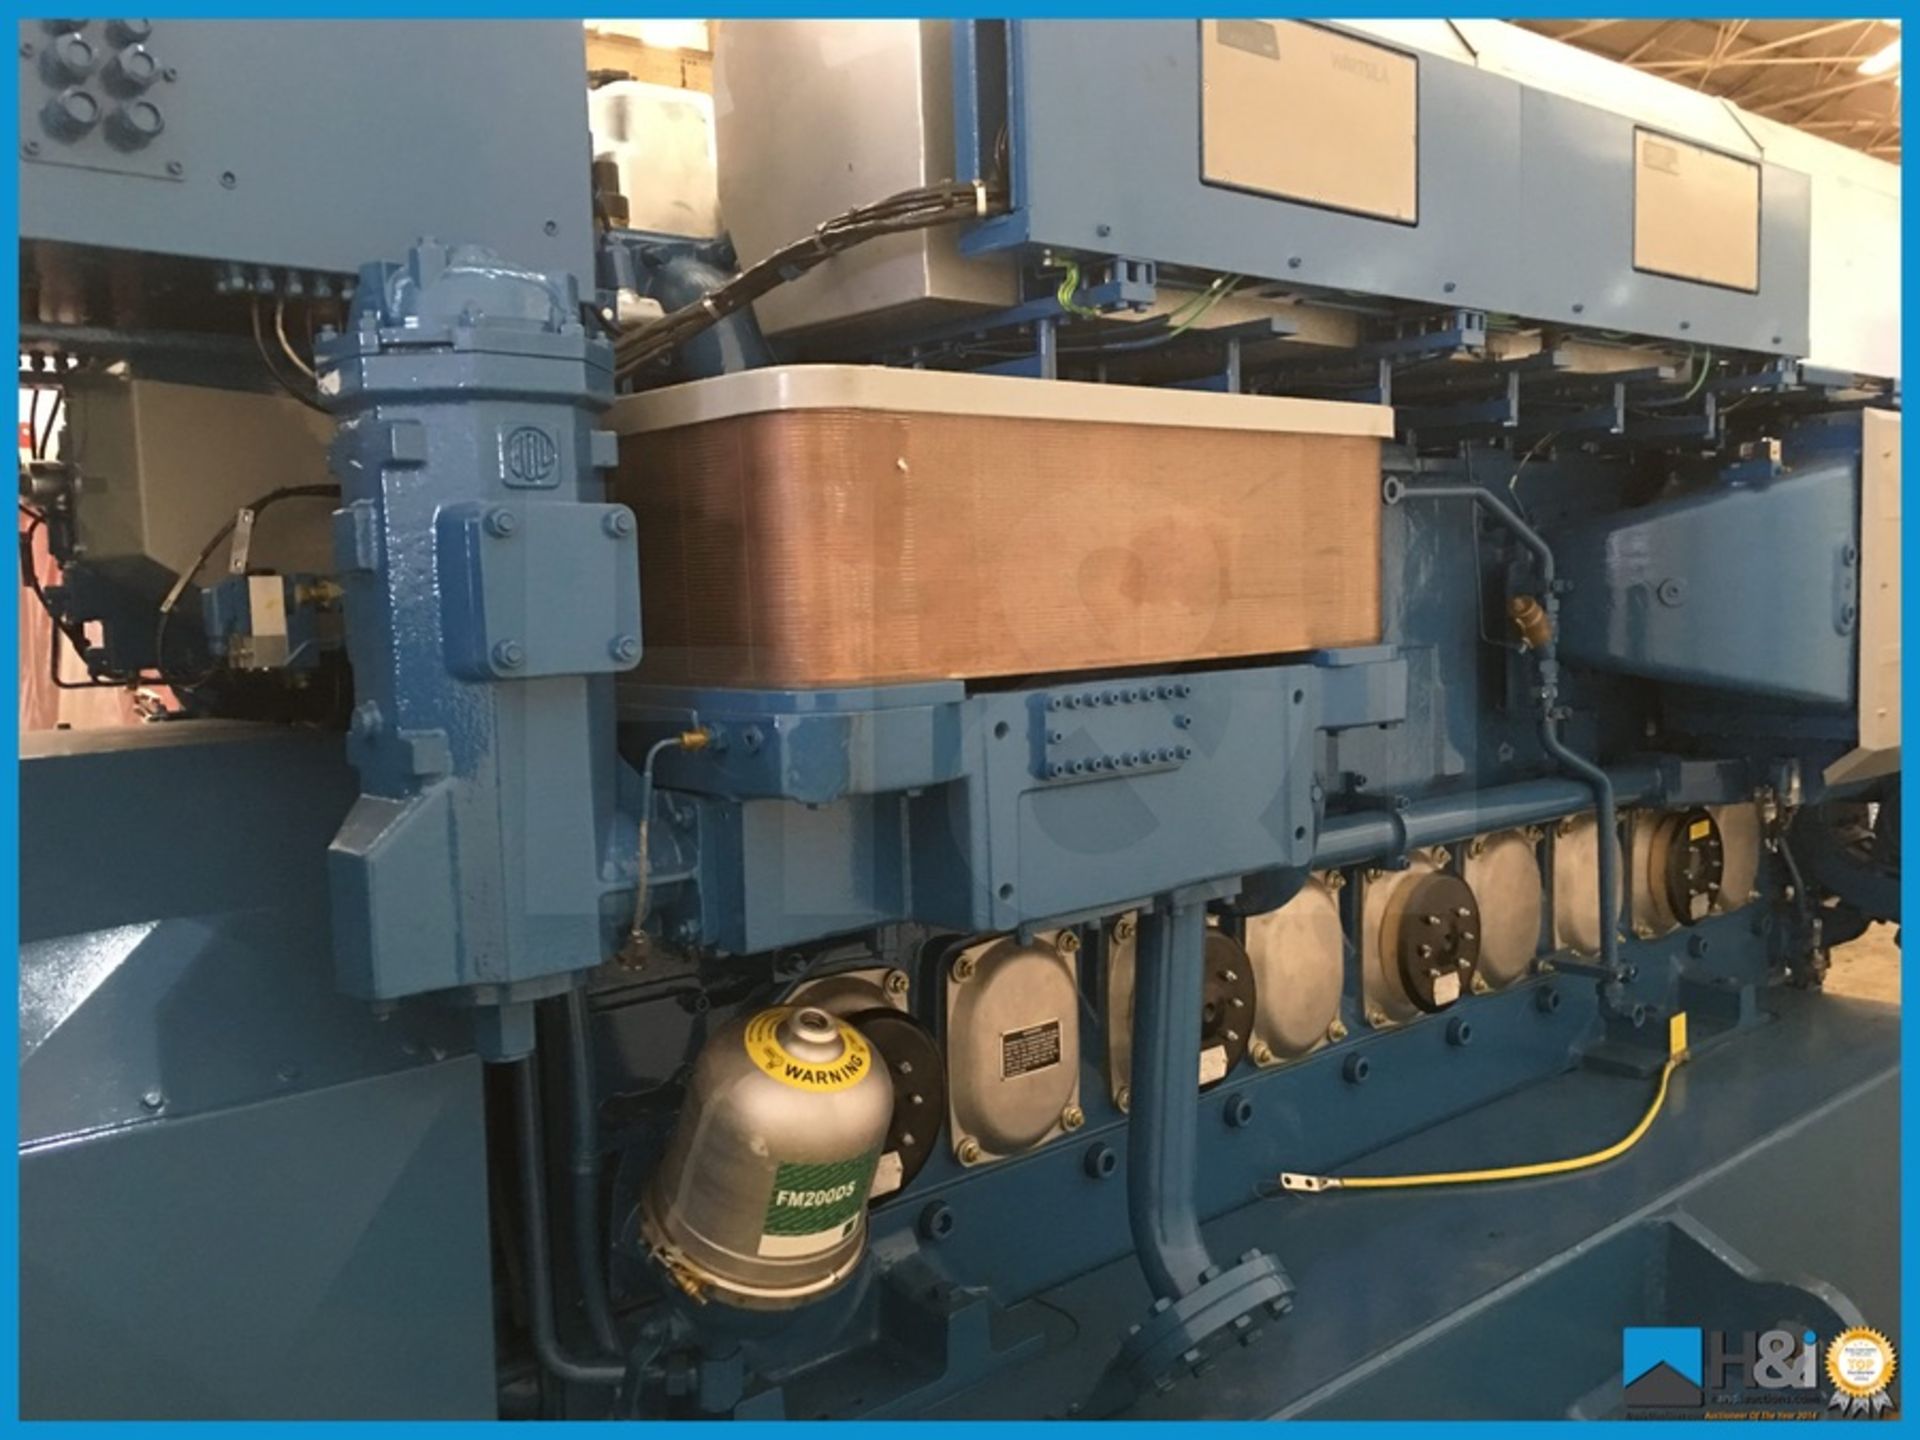 Unused Wartsila 9L20 high capacity diesel generator manufactured in 2013 for a large marine - Image 10 of 17